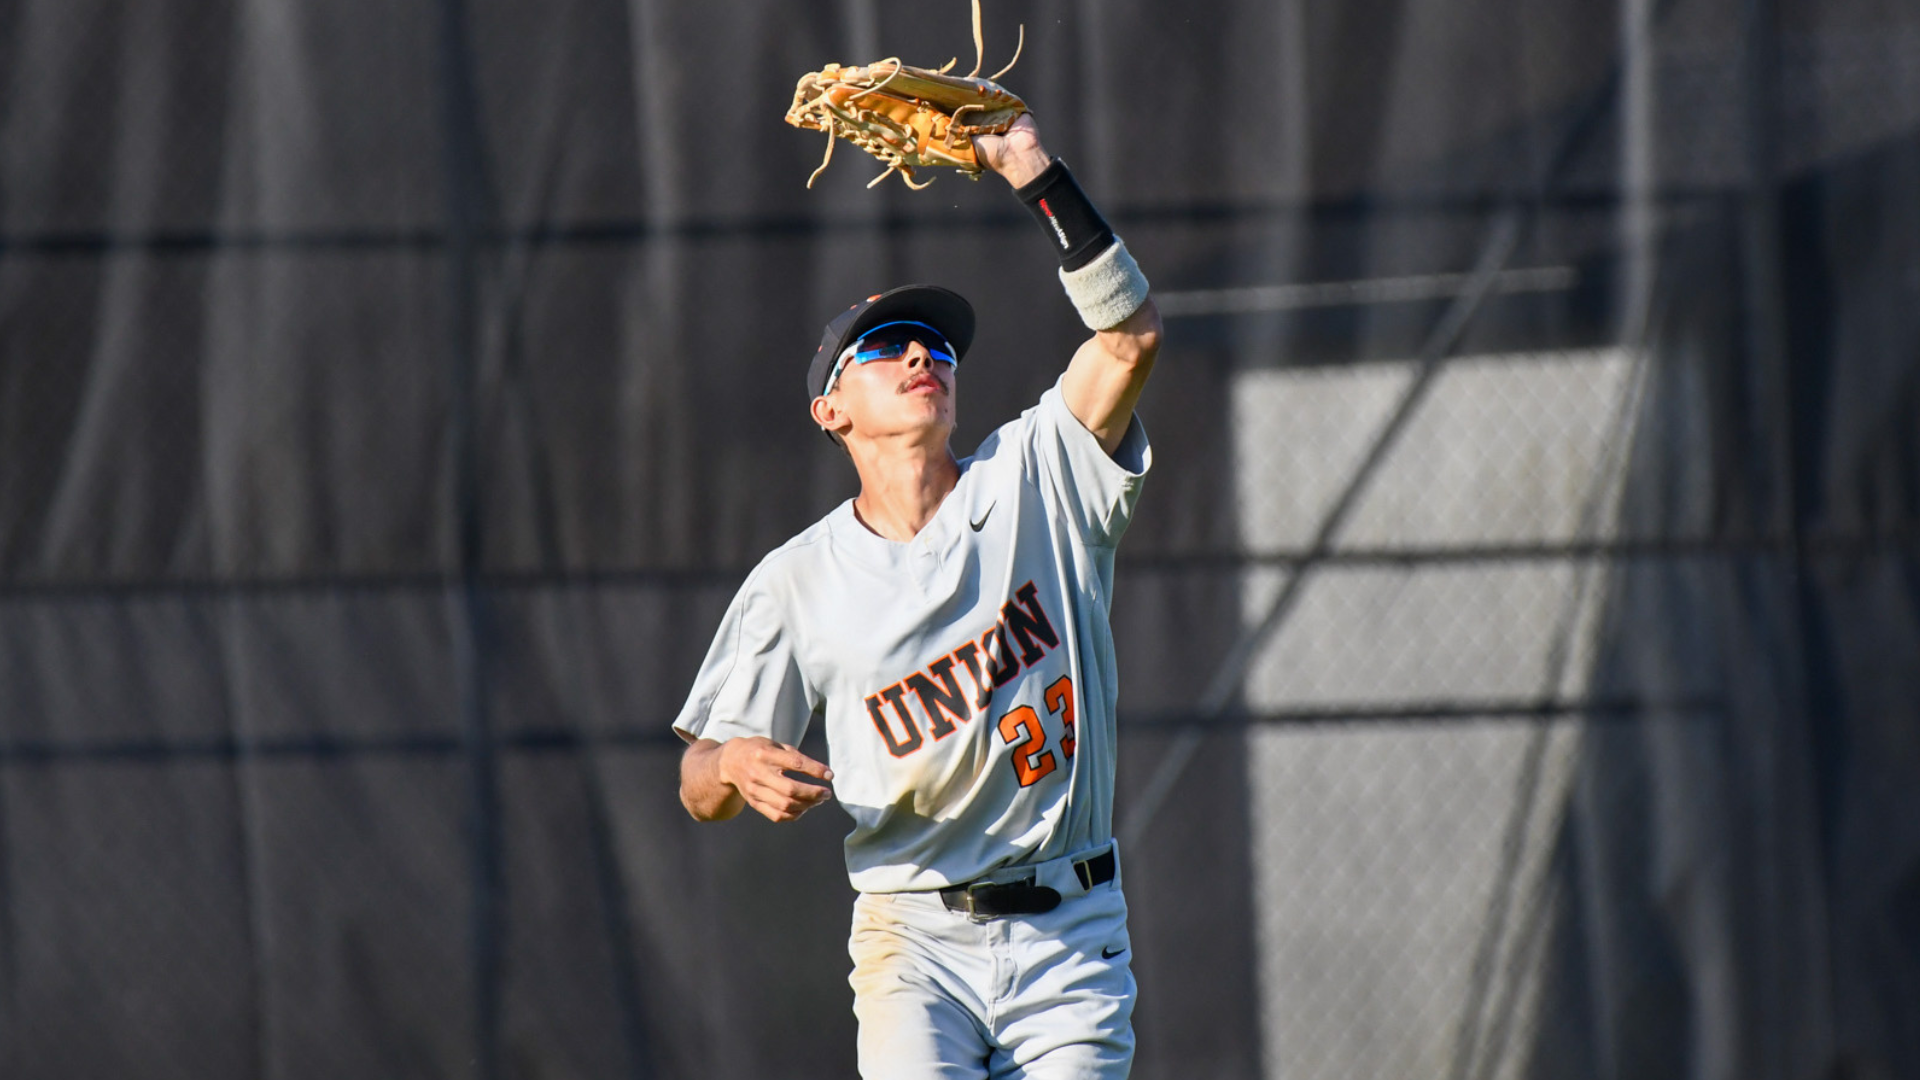 Union falls short to Montreat in first game of conference series